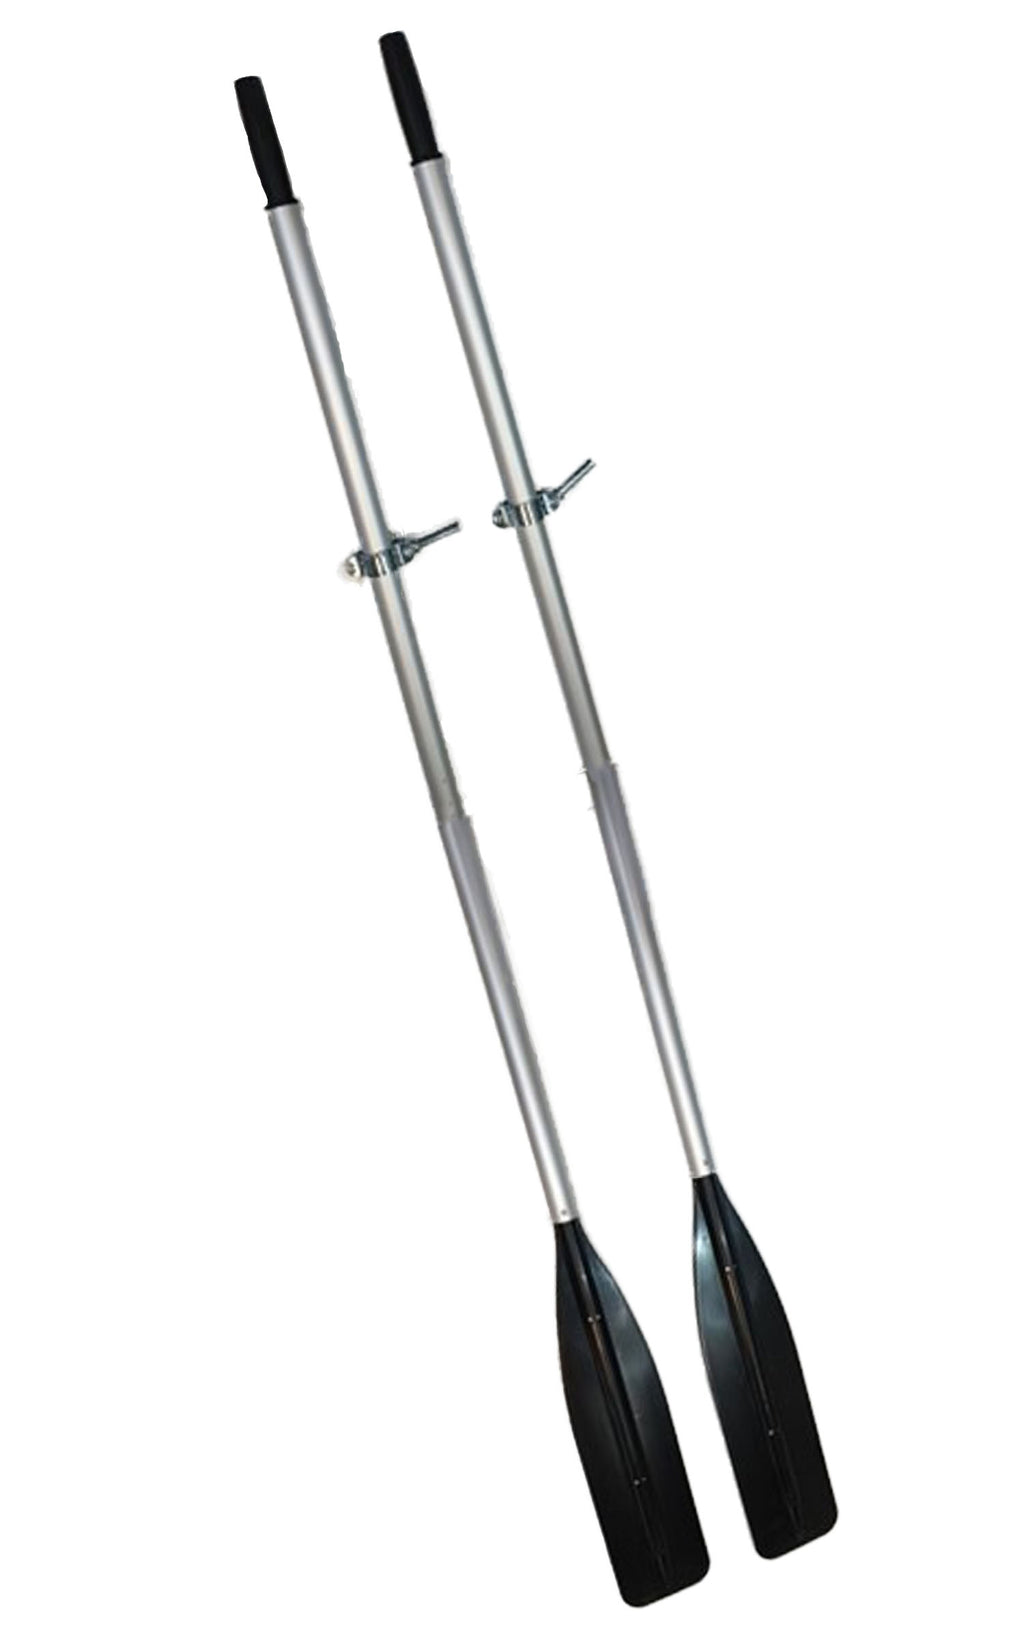 pair of aluminum oars with black paddles